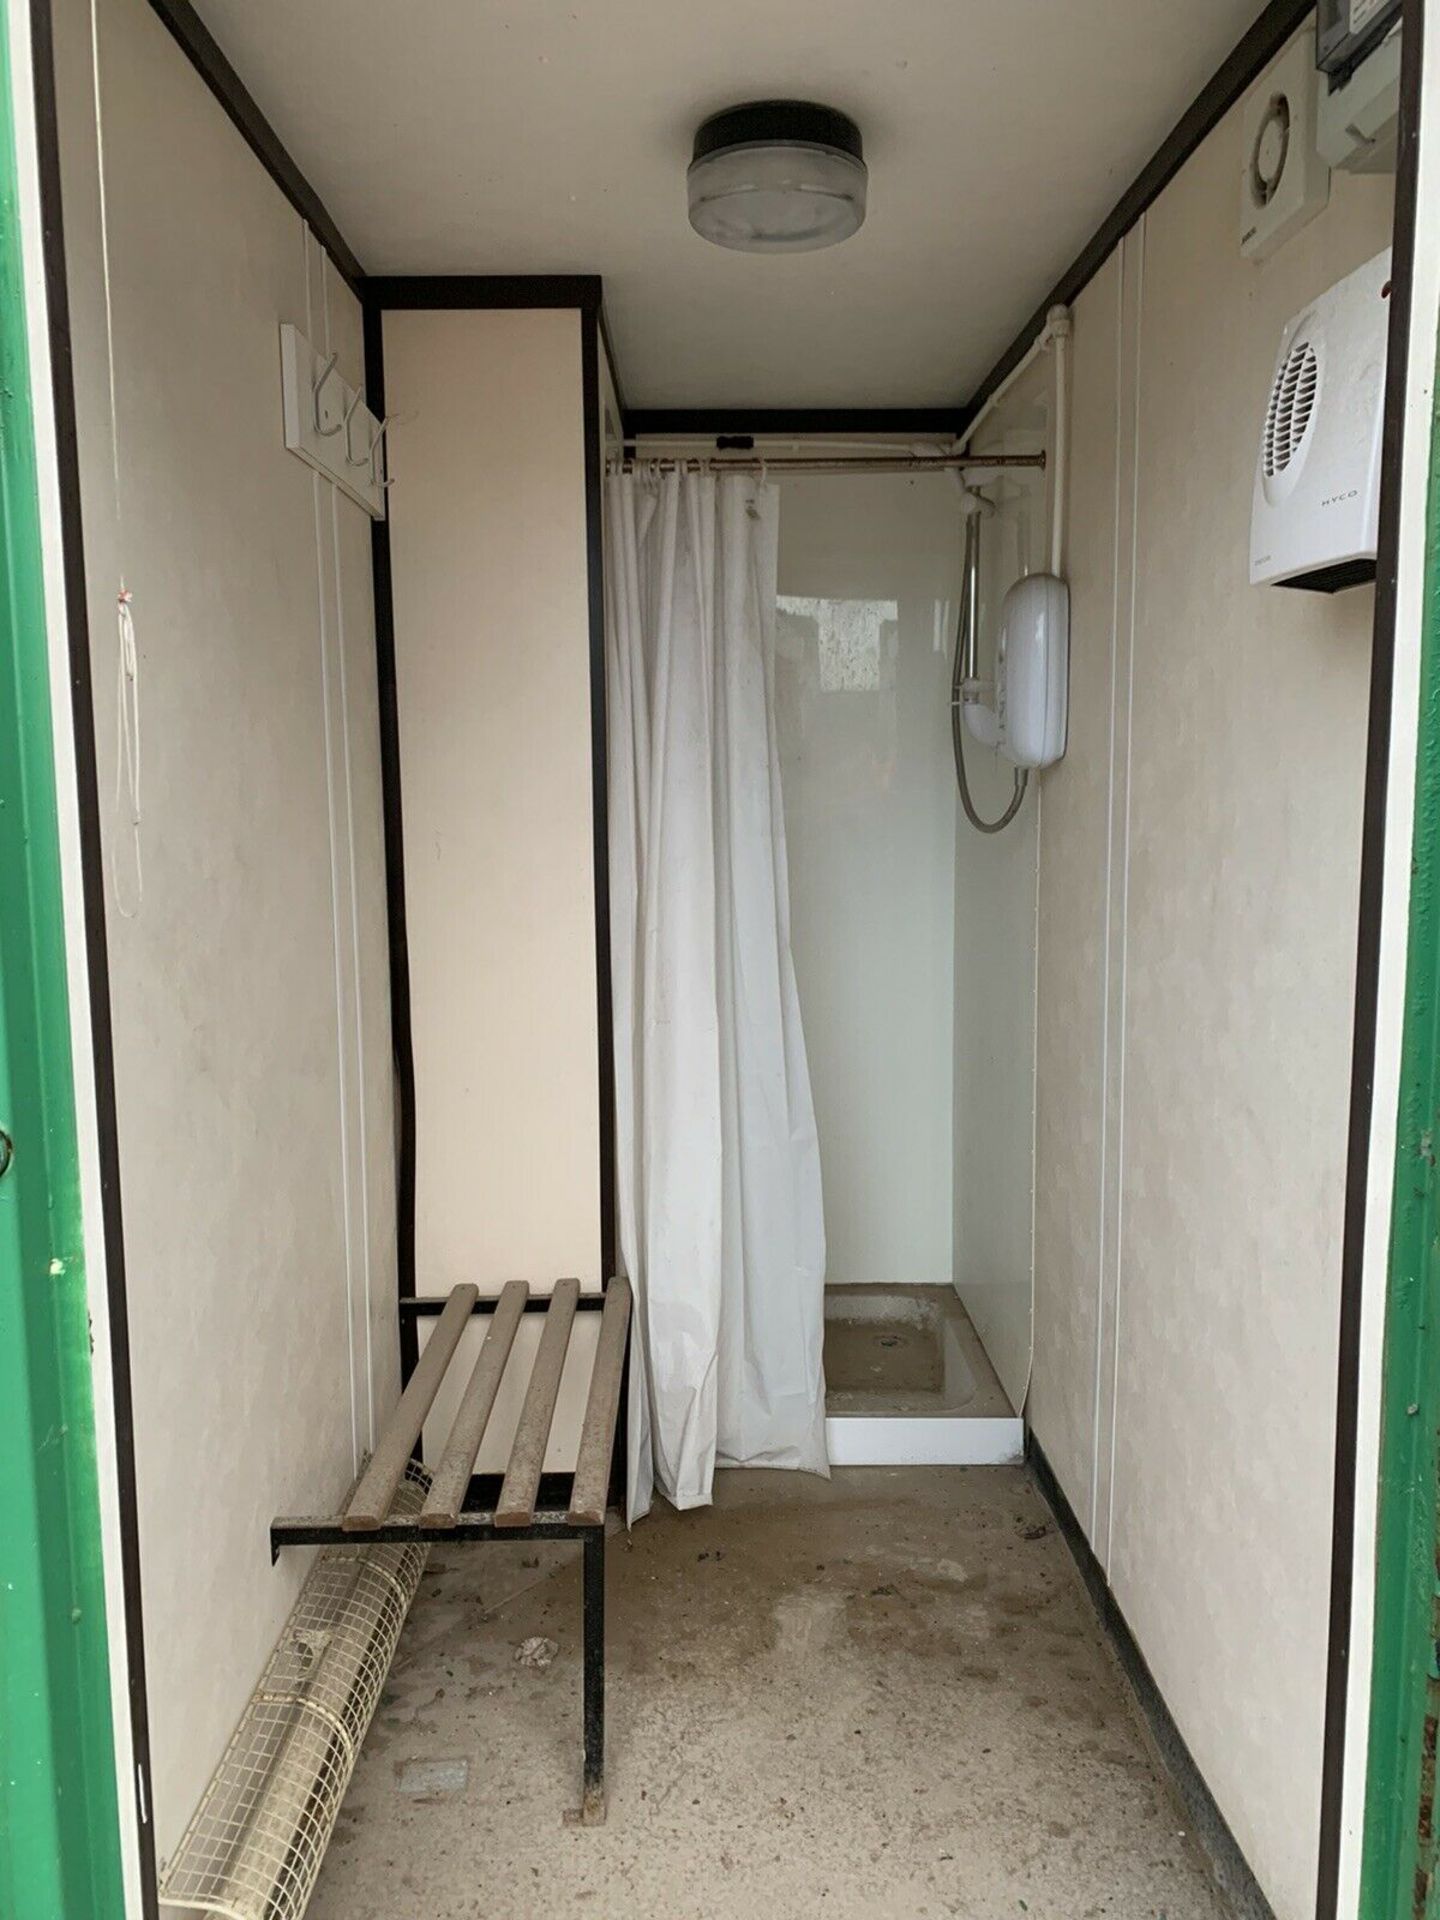 Portable Toilet Block With Shower - Image 2 of 10